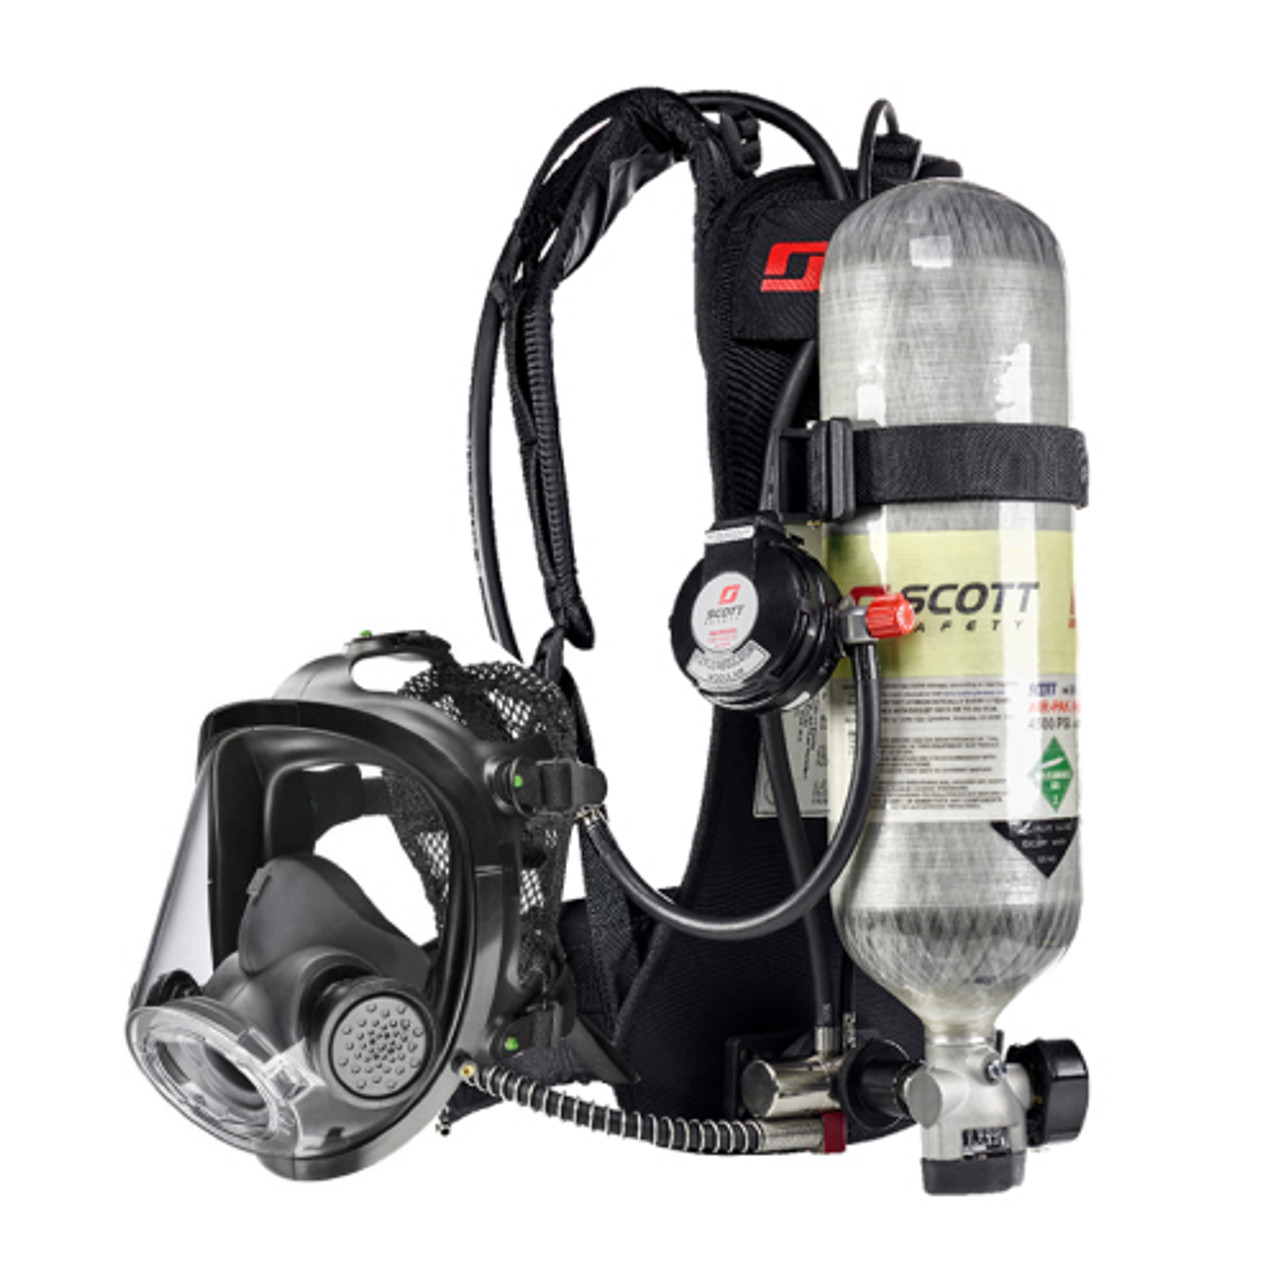 ACSi SCBA with Standard Harness, 2216 psig with 2216 psig Carbon 30-minute Cylinder, E-Z Flo Regulator, Standard Manifold, None Airline Option, AV-3000 SureSeal (M), Poly HH Facepiece, Gauge Console, None Case, Shipped 1 SCBA Per Box